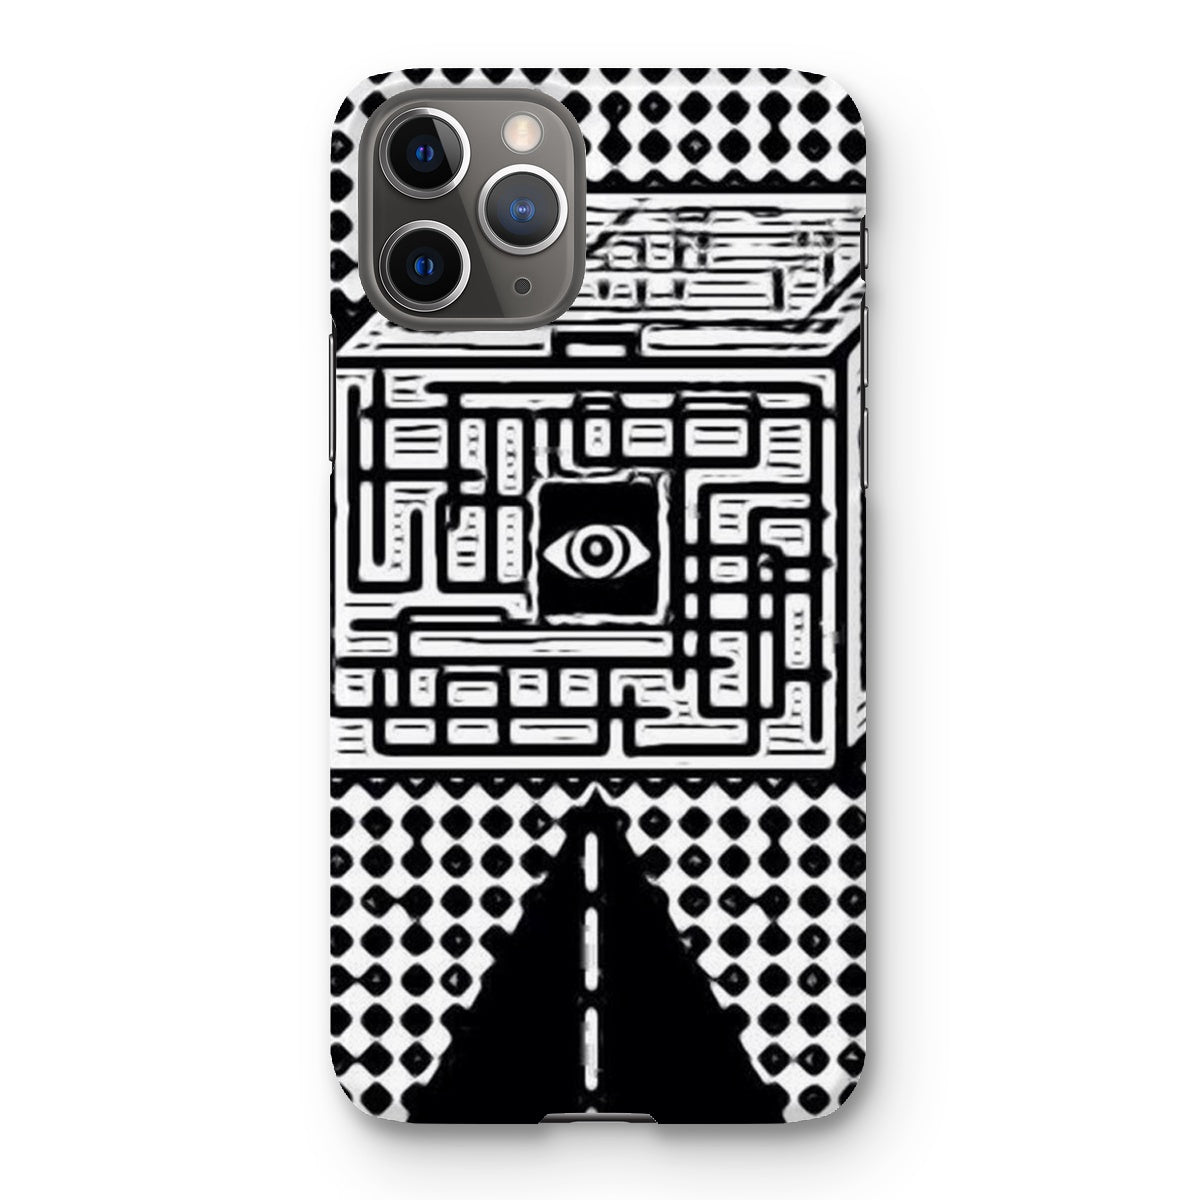 The Cube Snap Phone Case